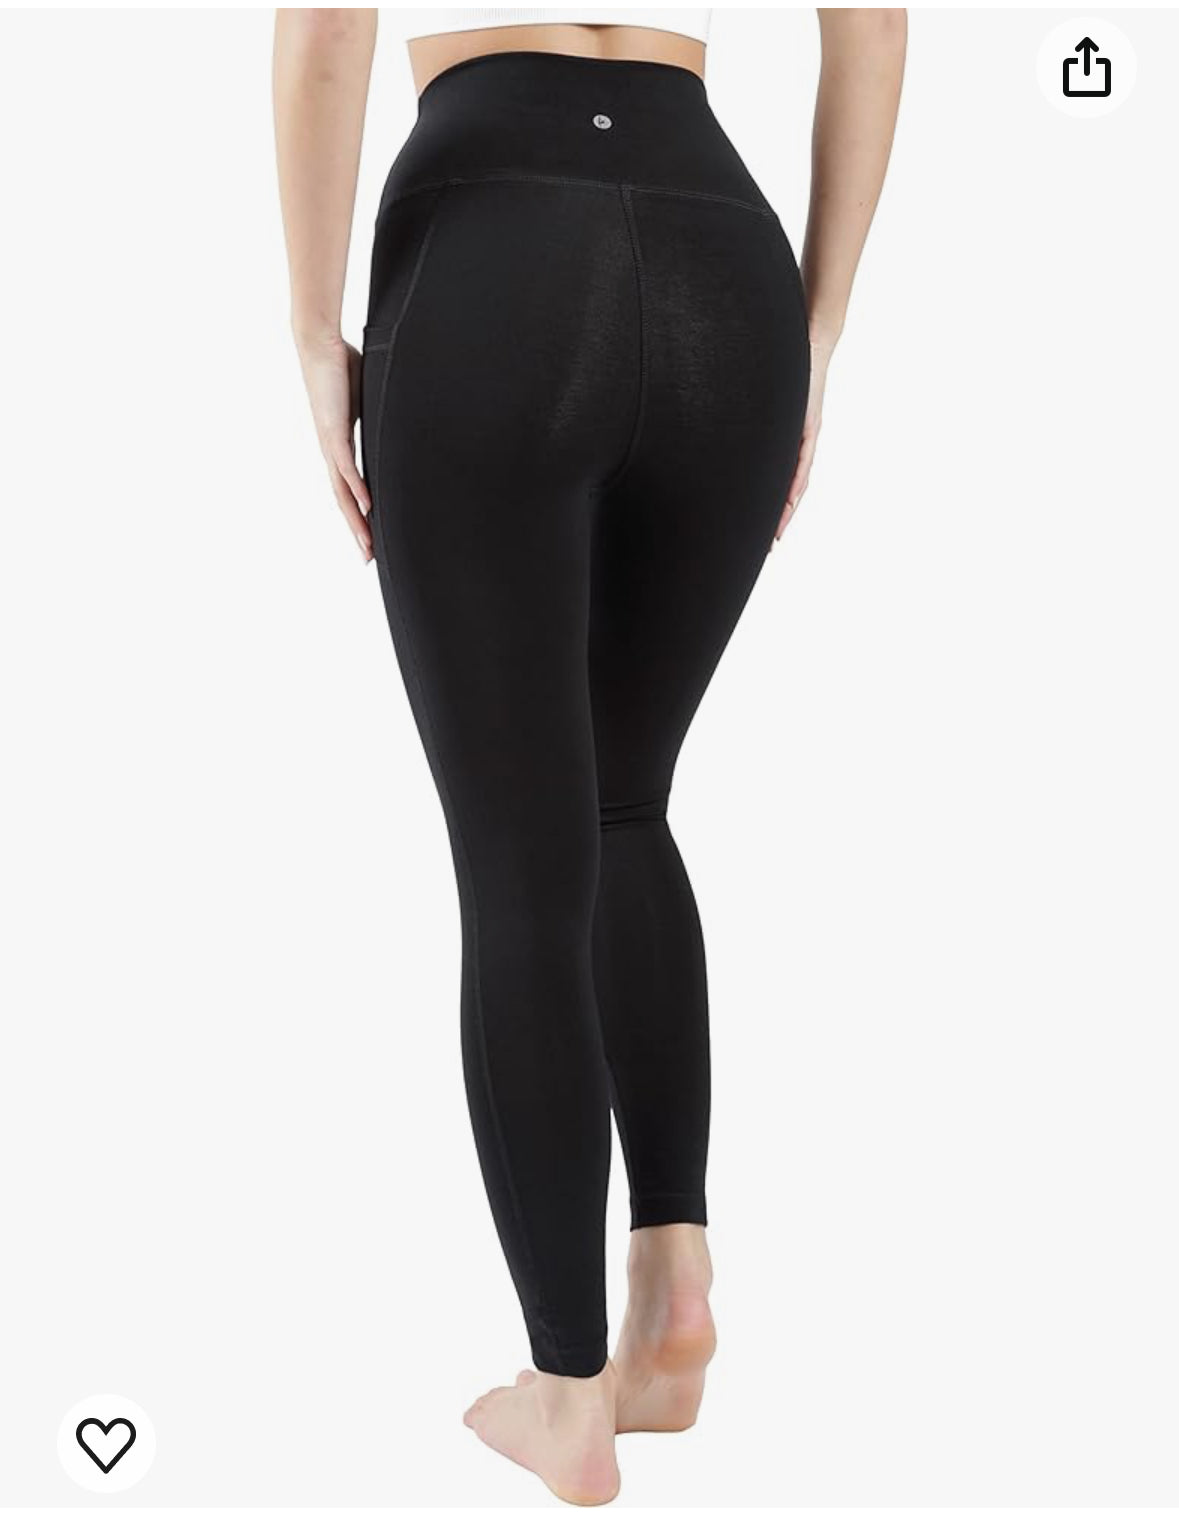 90° DEGREE BY REFLEX: High Waist Cotton Ankle Length Compression Legging 